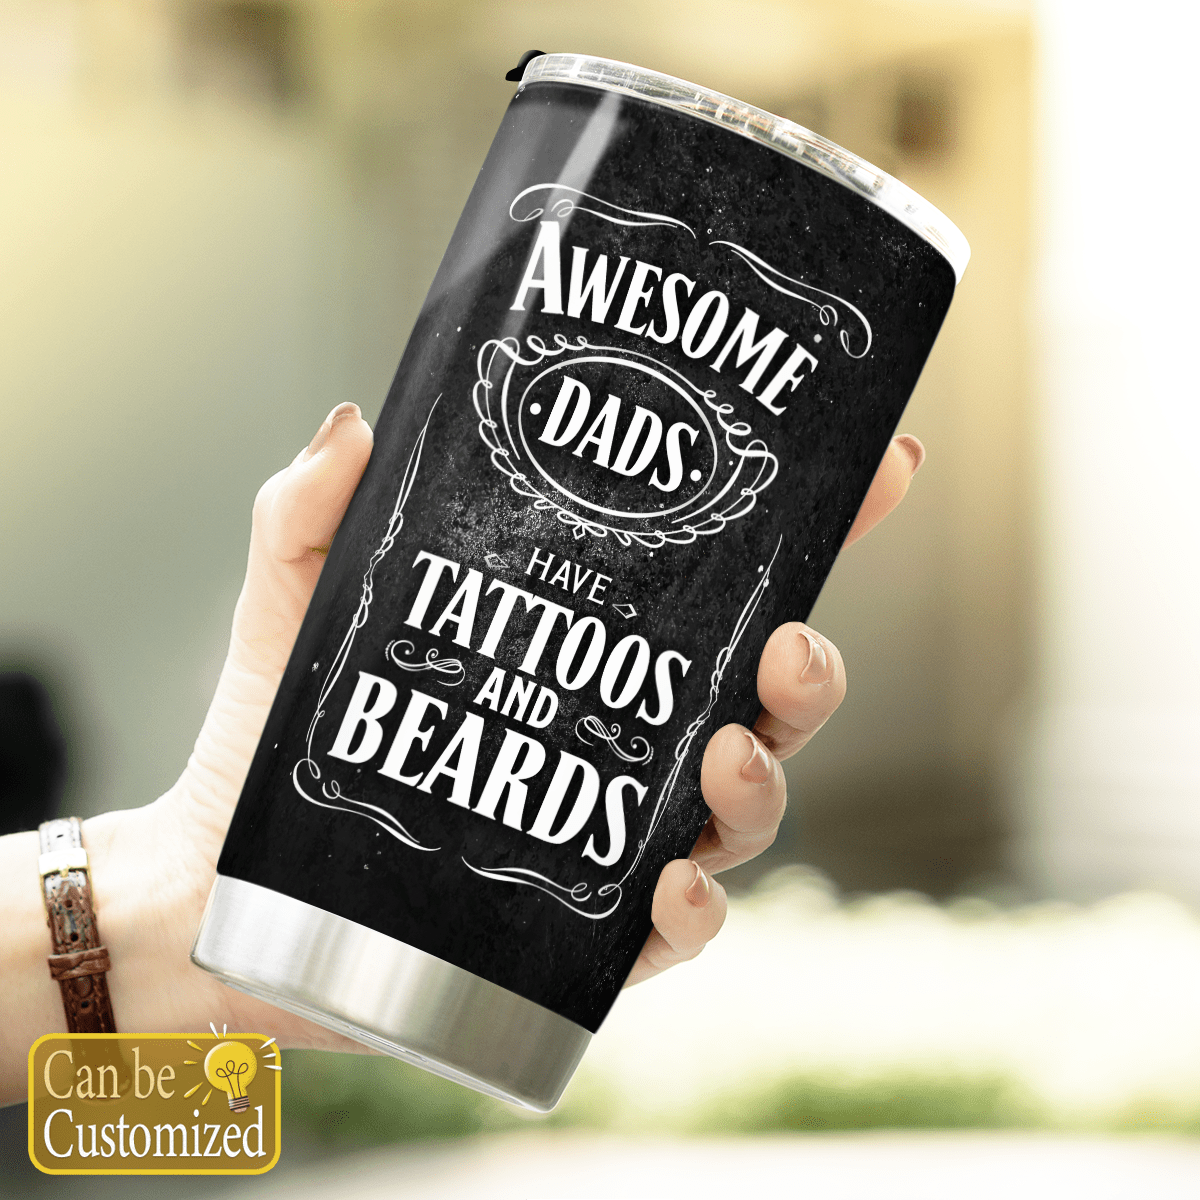 Awesome Dads Tattoos Beards Personalized